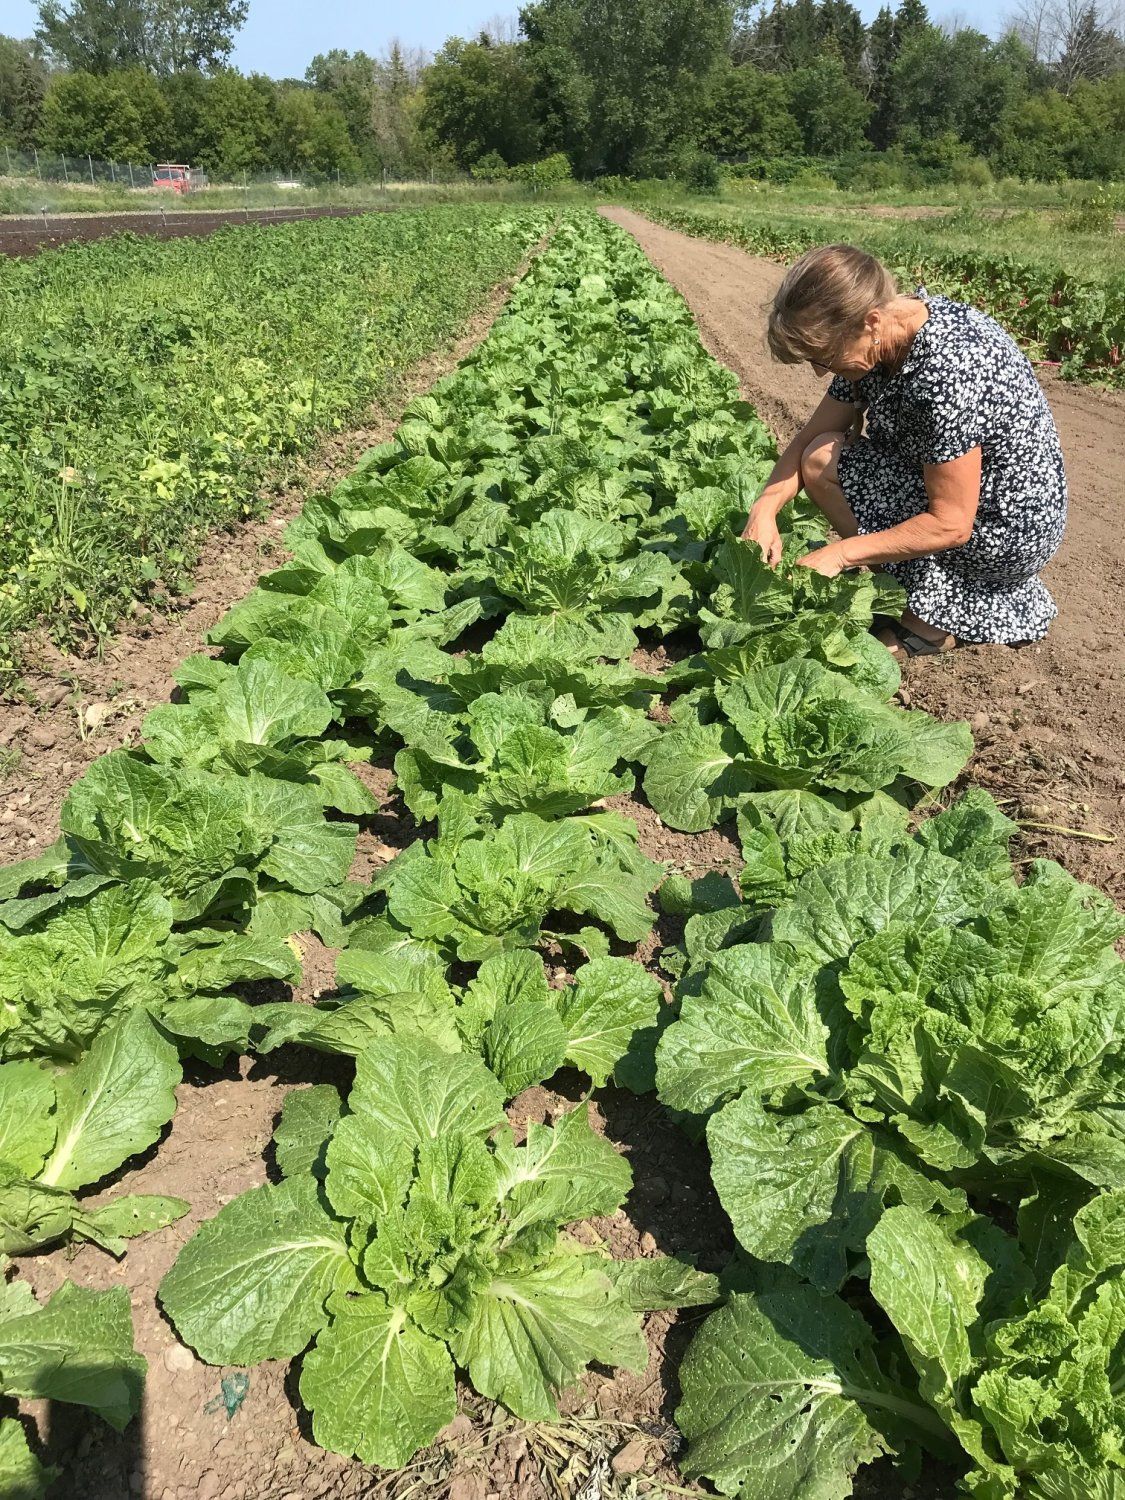 Previous Happening: Farm Happenings for August 4, 2021